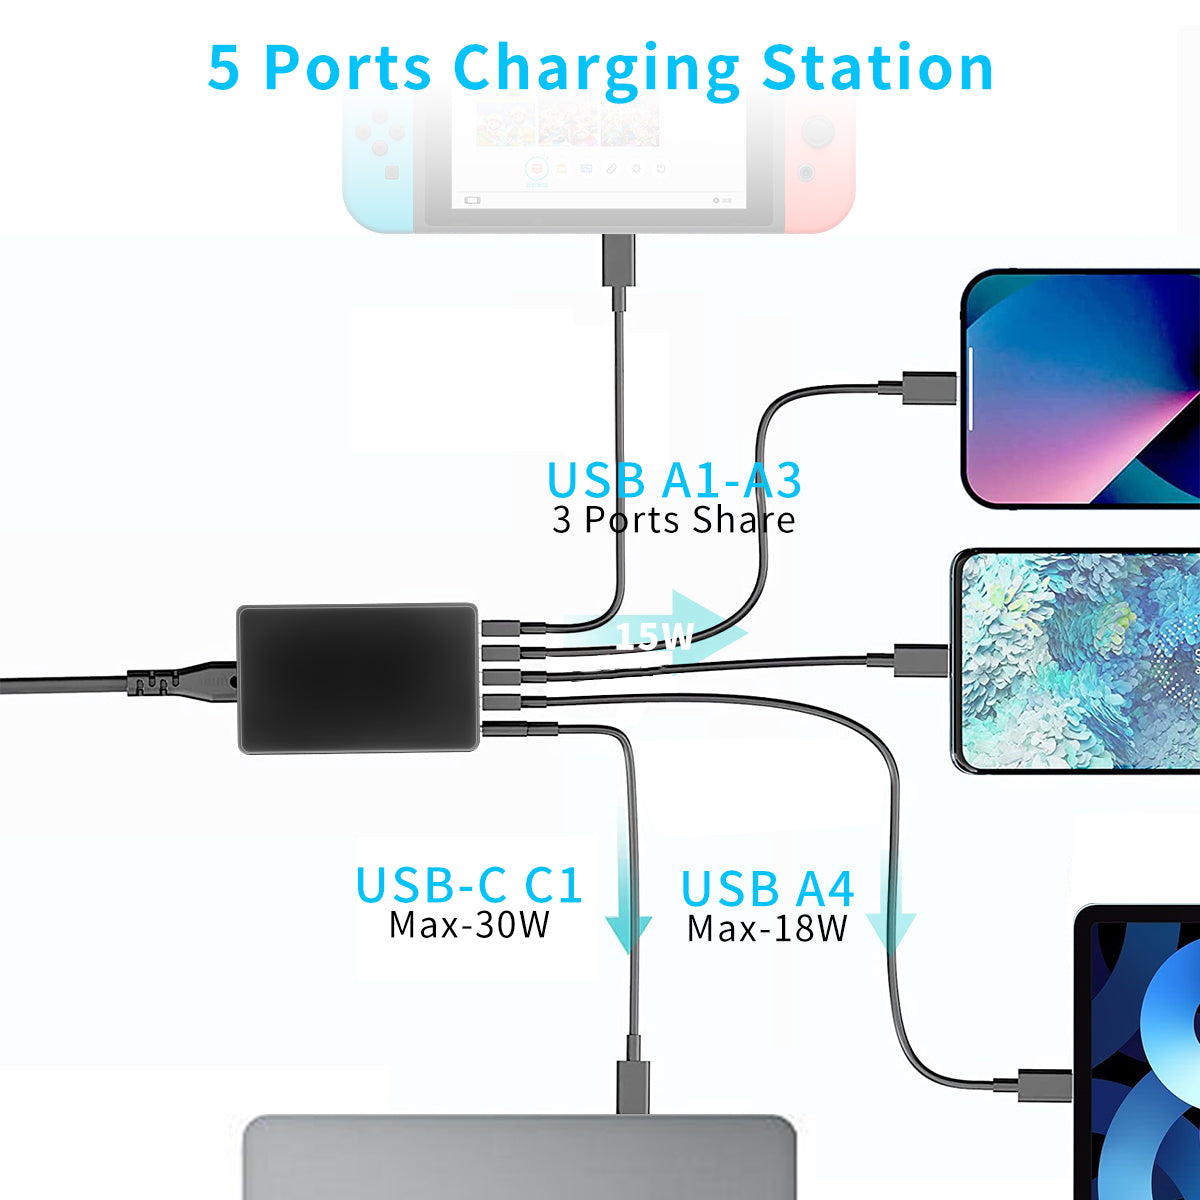 Verilux 60W Fast Charger, 20W PD Charger & 4 Smart Fast Charging USB Ports, 5 in 1 Multi Charger Charging Station, Multi USB PD Charger for Phones, Smartwatches, Tablets, MacBook, iPad (Cable 5.3Ft)